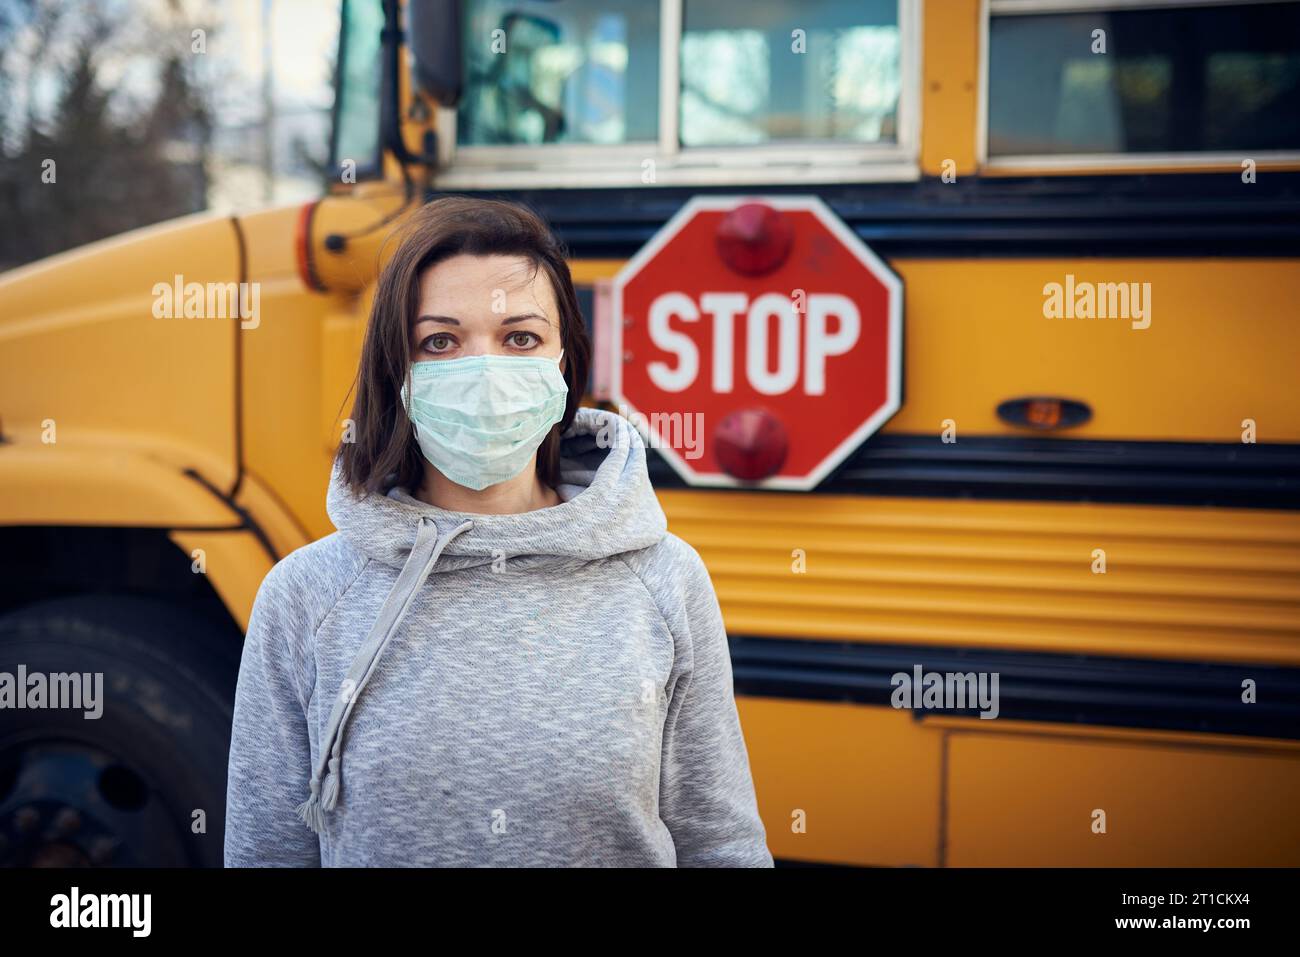 A woman in a protective mask stands on the background of a school bus. A large stop sign is visible on the background. Stock Photo